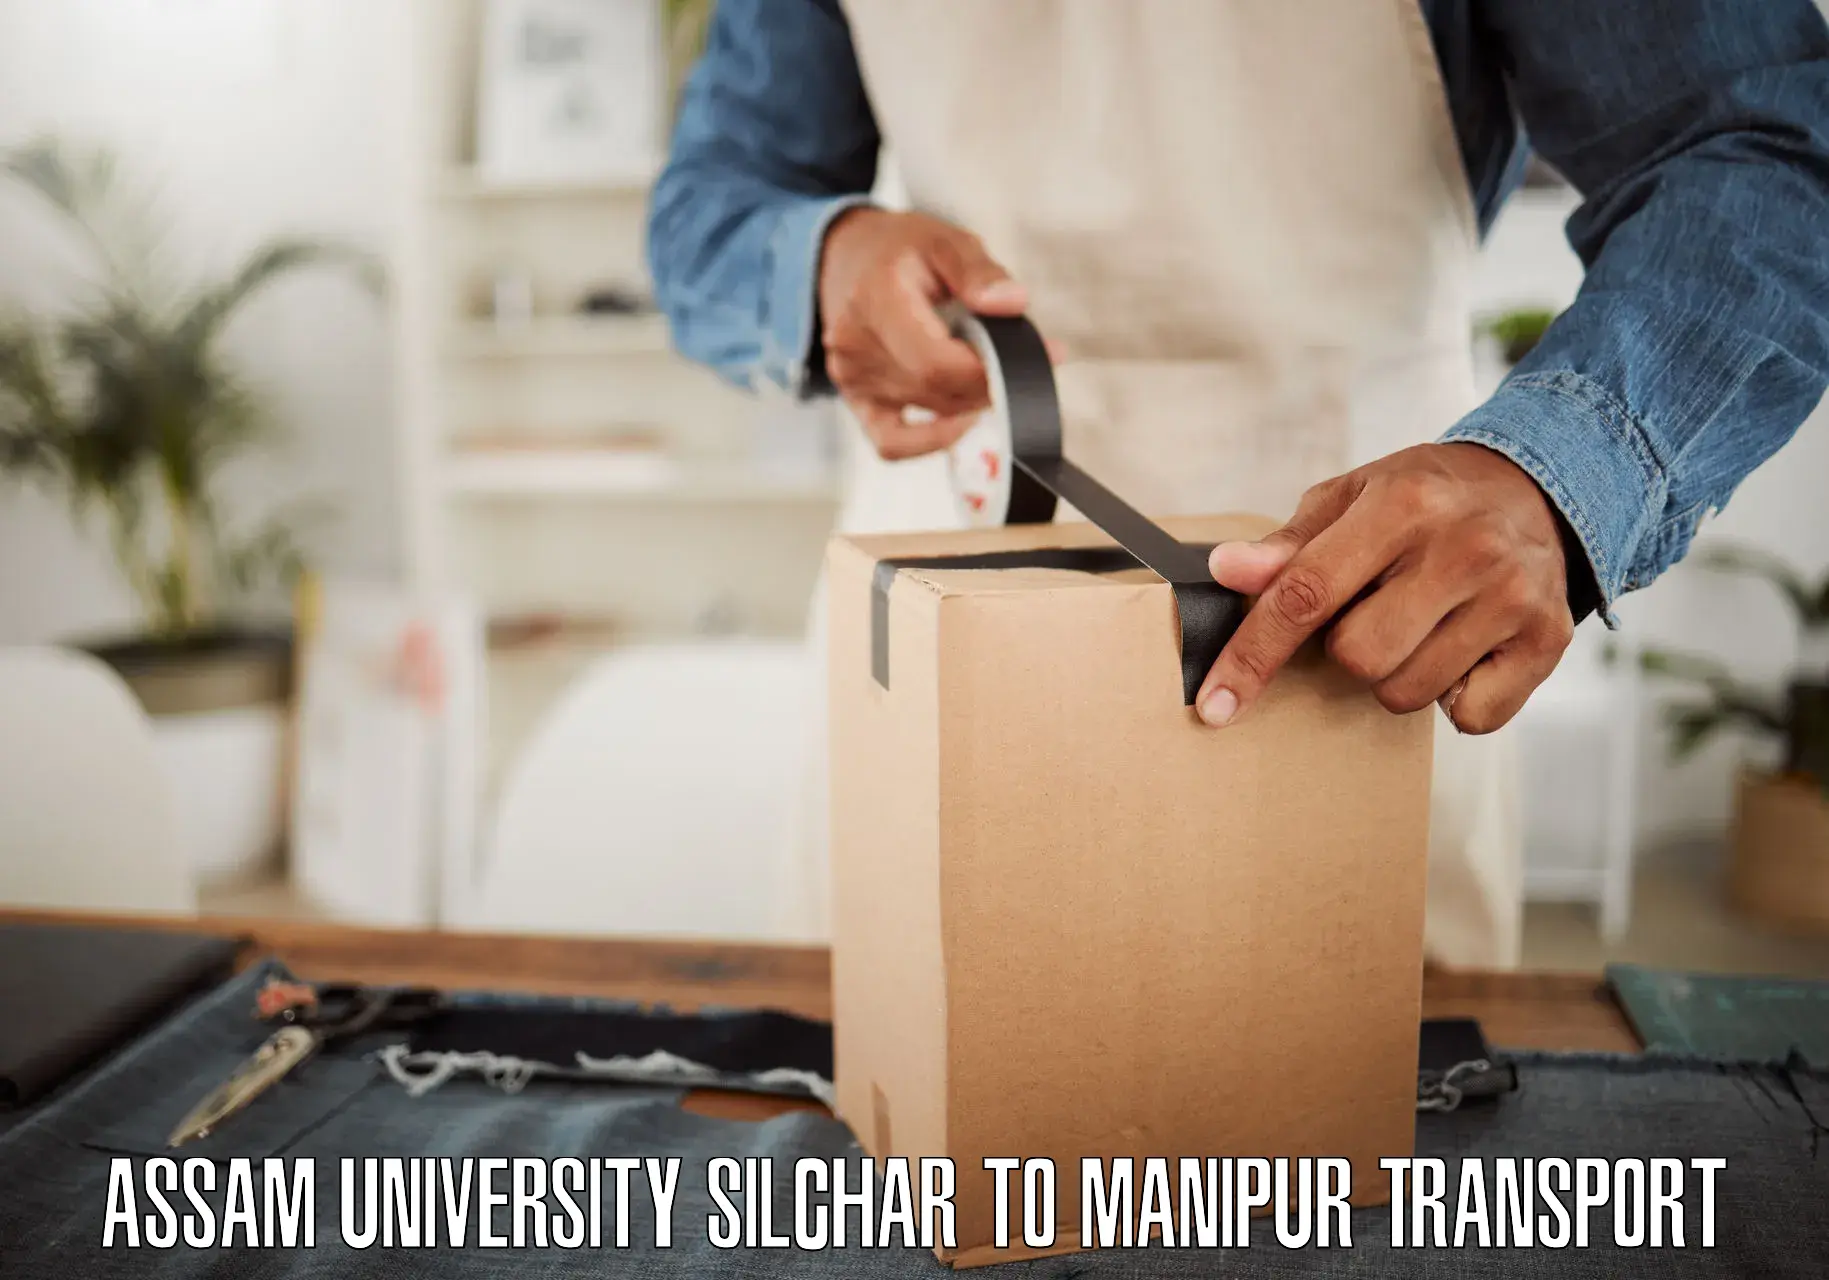 Daily transport service in Assam University Silchar to Imphal